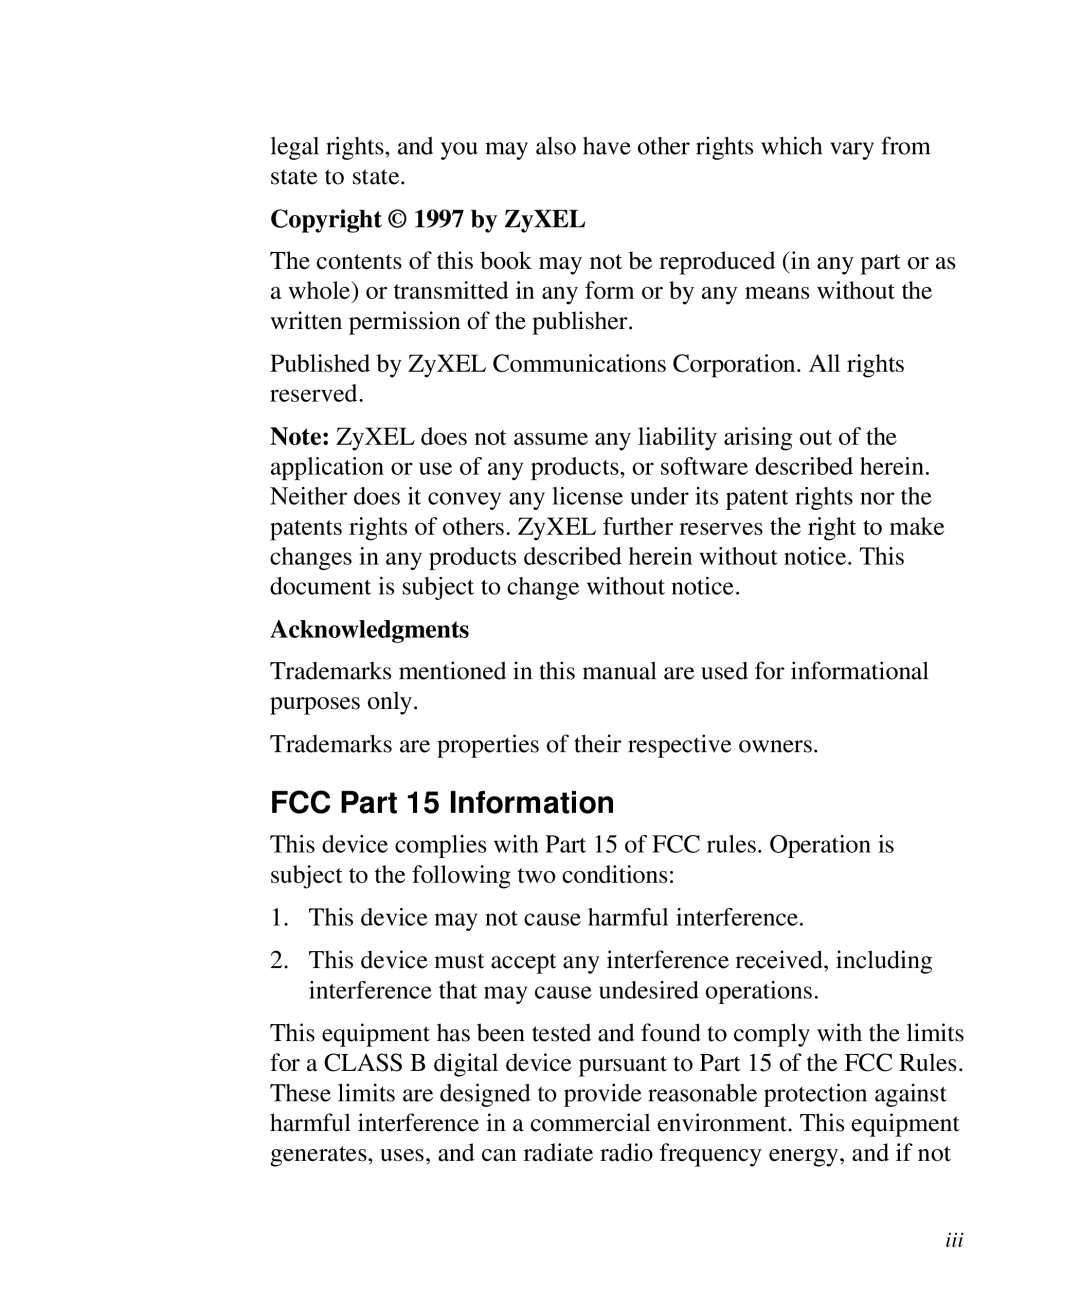 ZyXEL Communications Prestige100 user manual FCC Part 15 Information, Copyright 1997 by ZyXEL, Acknowledgments 